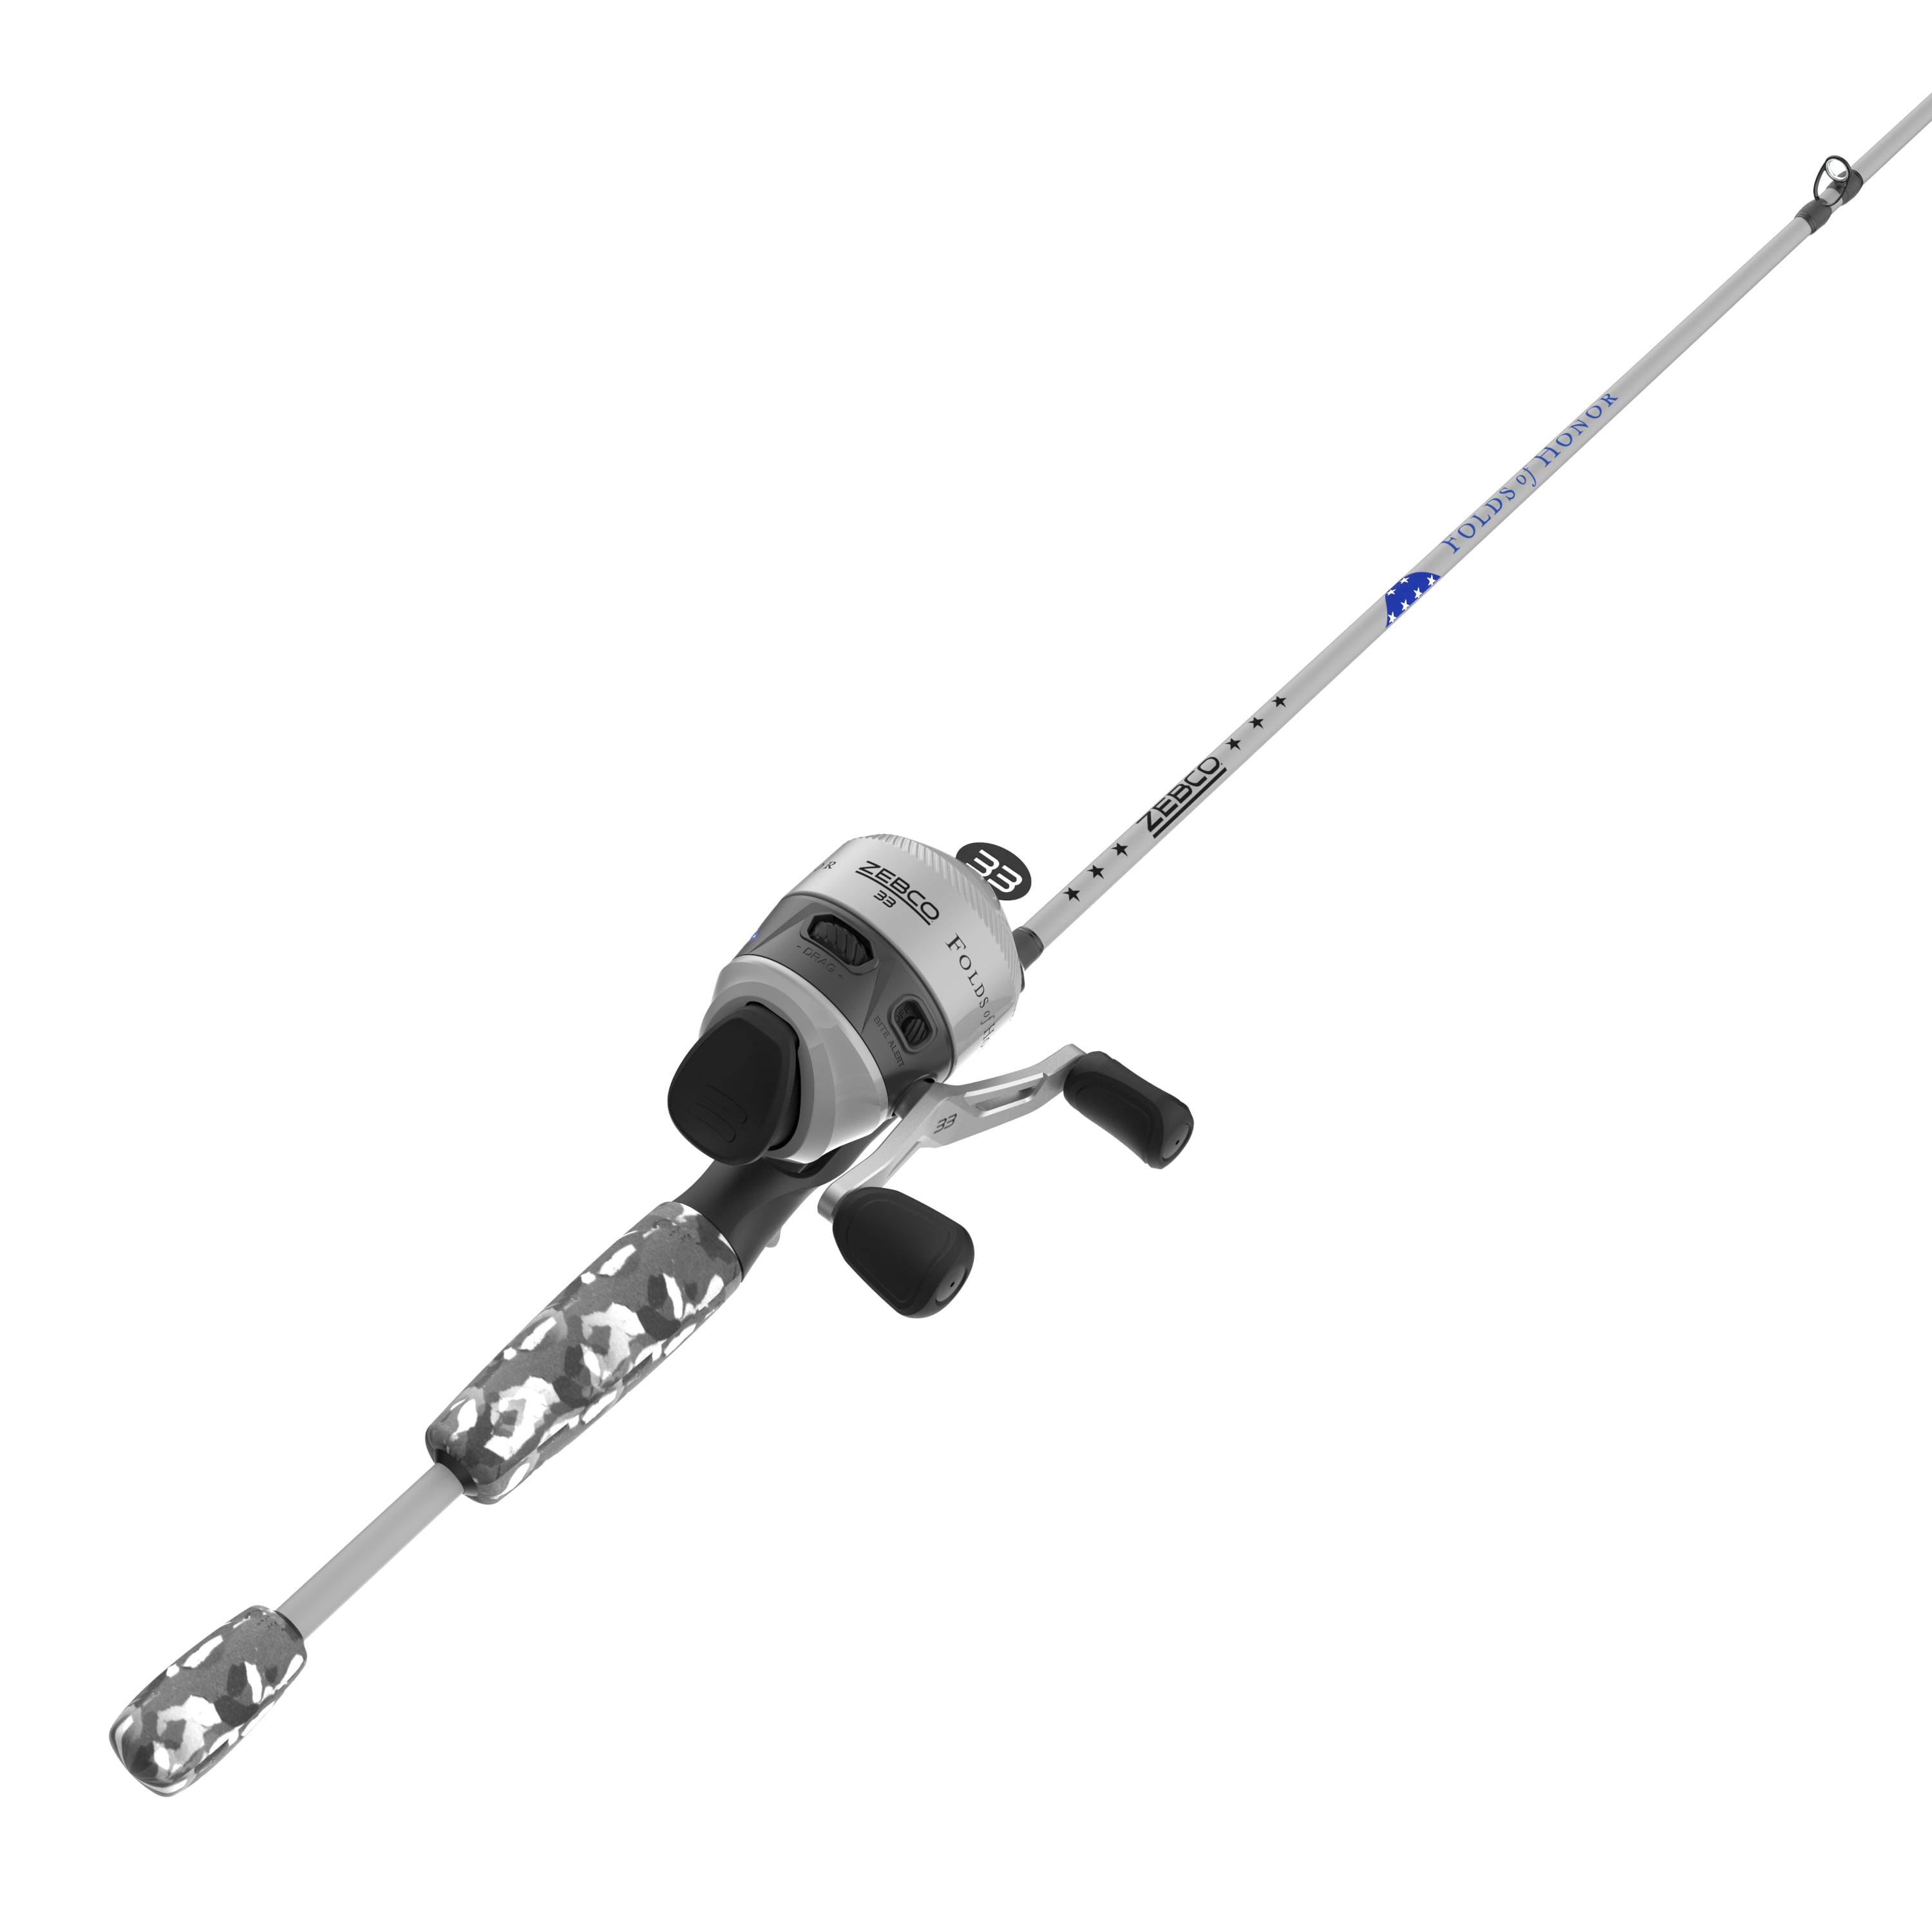 Zebco 33 Micro Spinning Reel and Telescopic Fishing Rod Combo, Extendable  19-Inch to 5-Foot Telescopic Fishing Pole with ComfortGrip Rod Handle,  QuickSet Anti-Reverse Fishing Reel, Silver/Black 